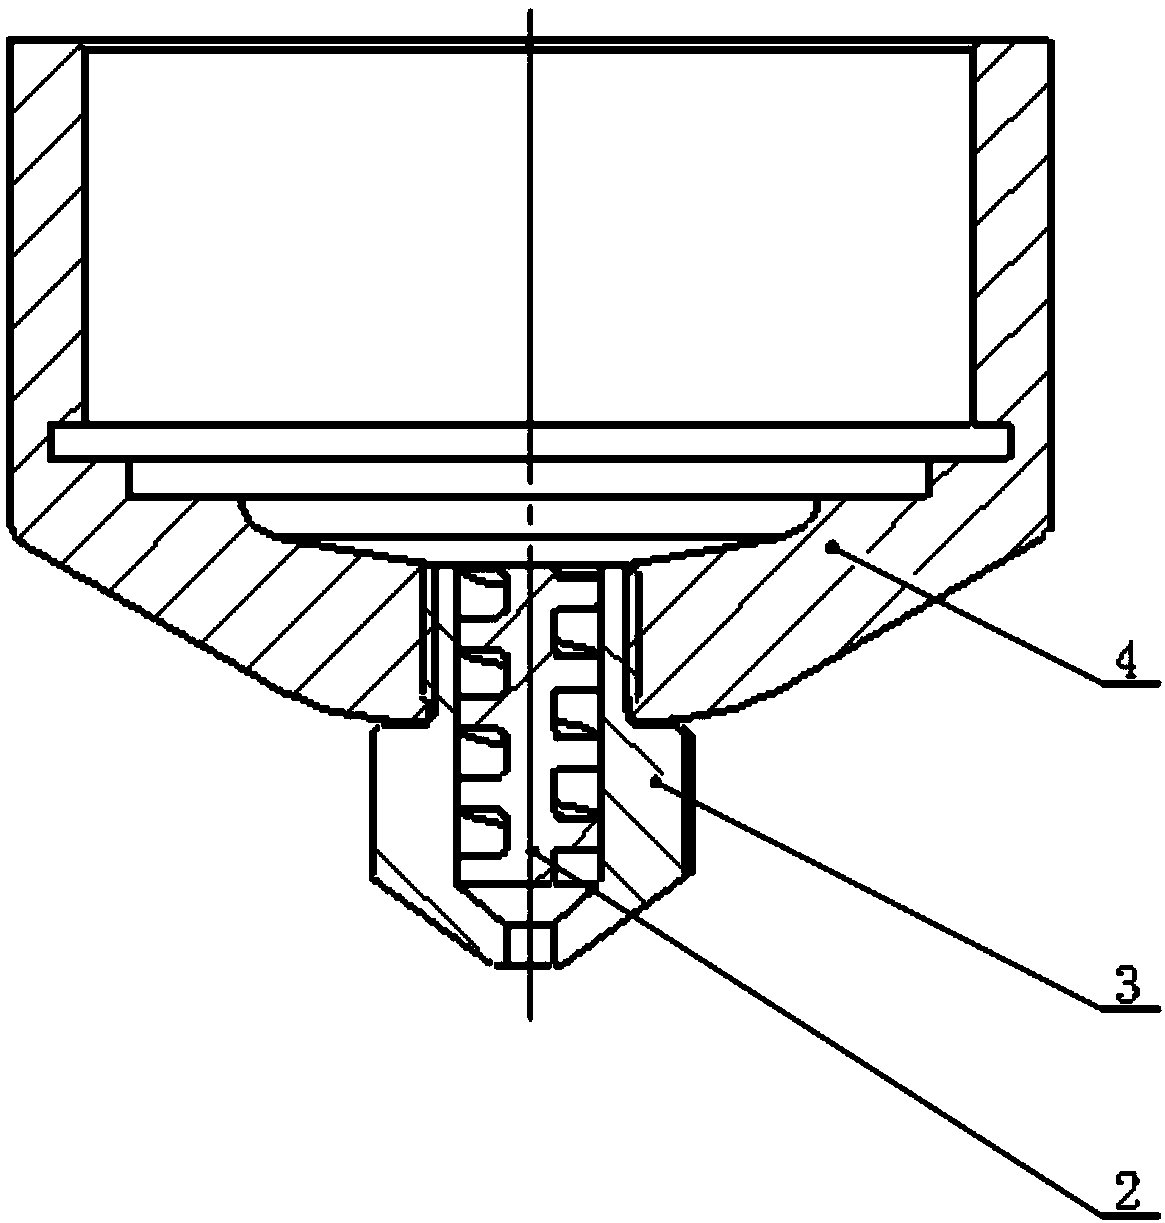 Printing head applied to fused deposition modeling (FDM) printer